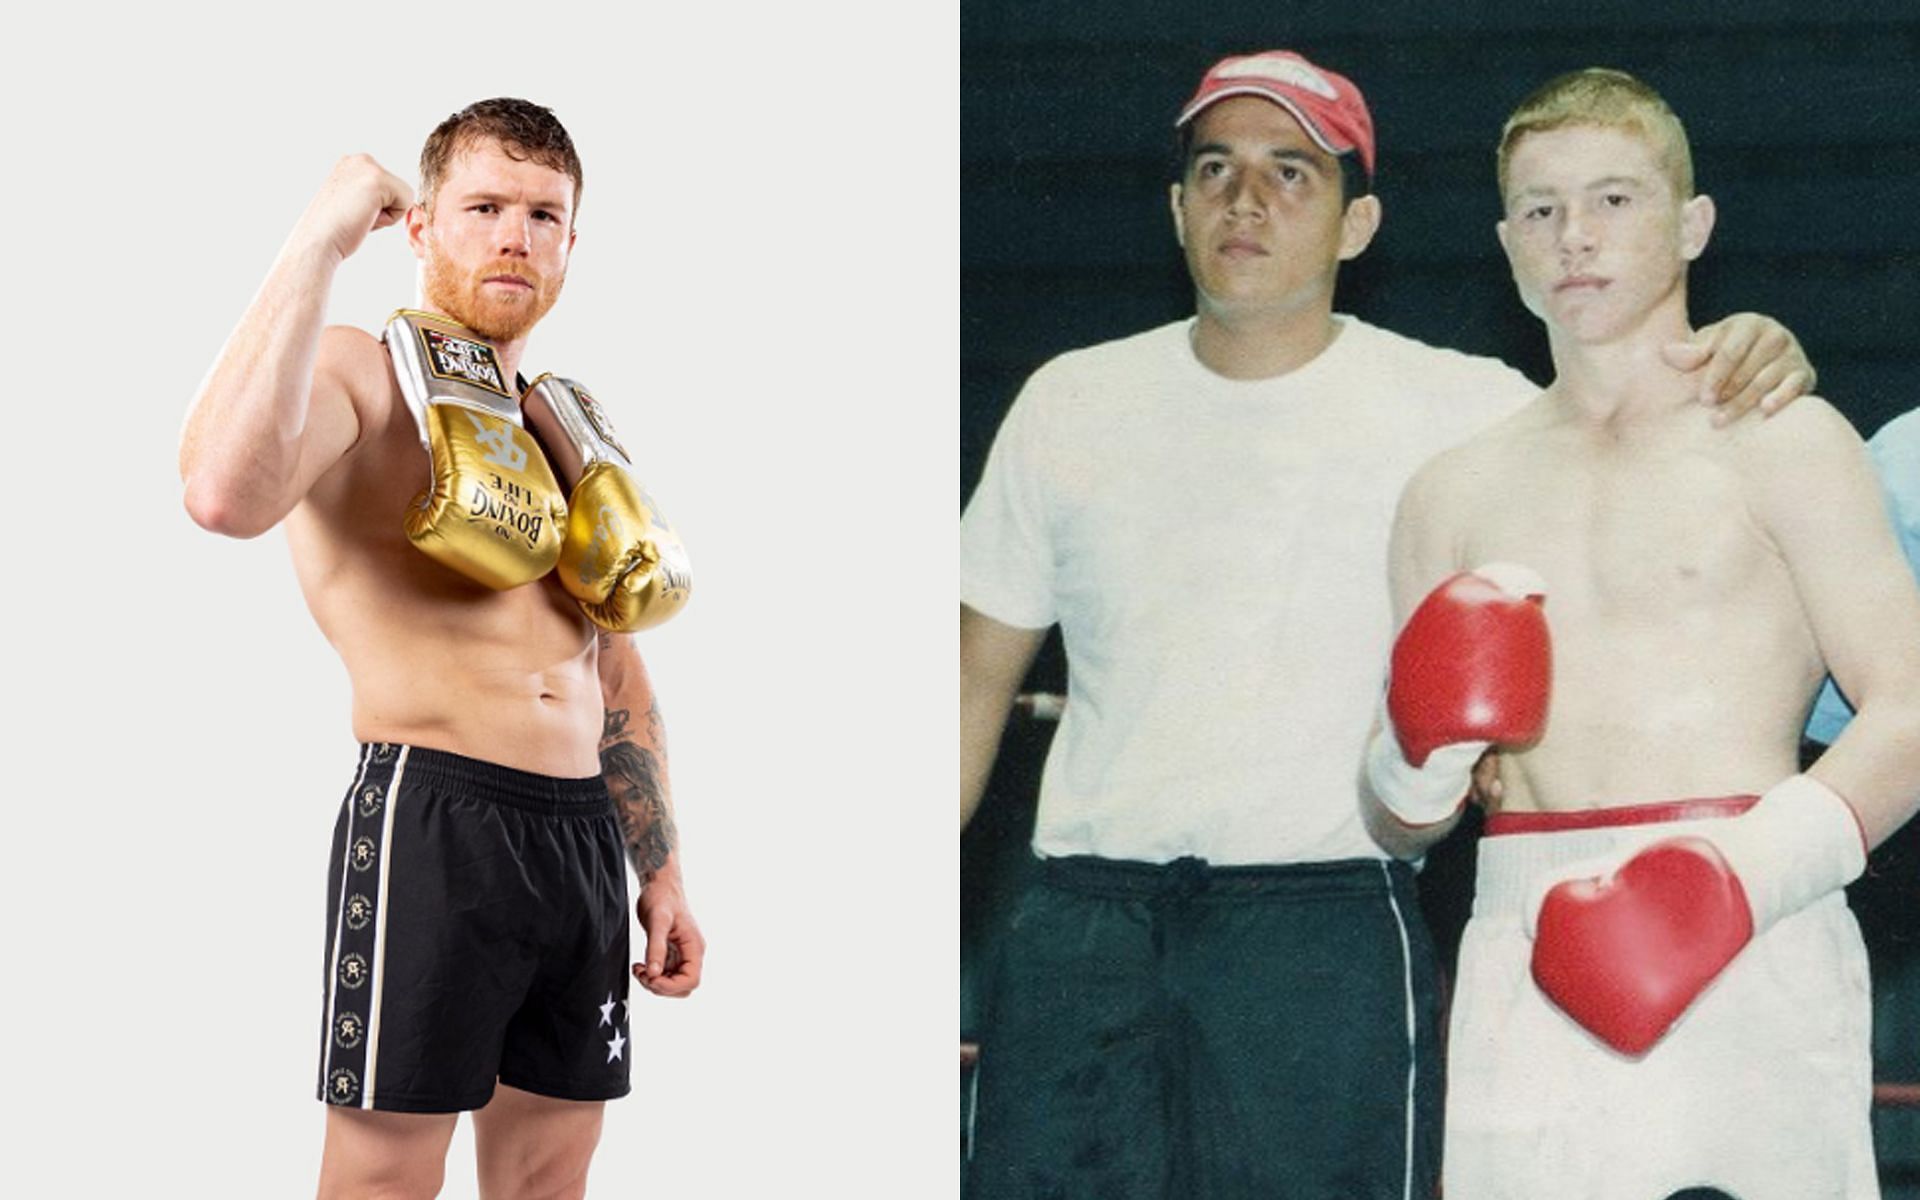 Canelo Alvarez now (left) and Canelo Alvarez with his coach during his teenage years (right) (Images via @canelo Instagram)